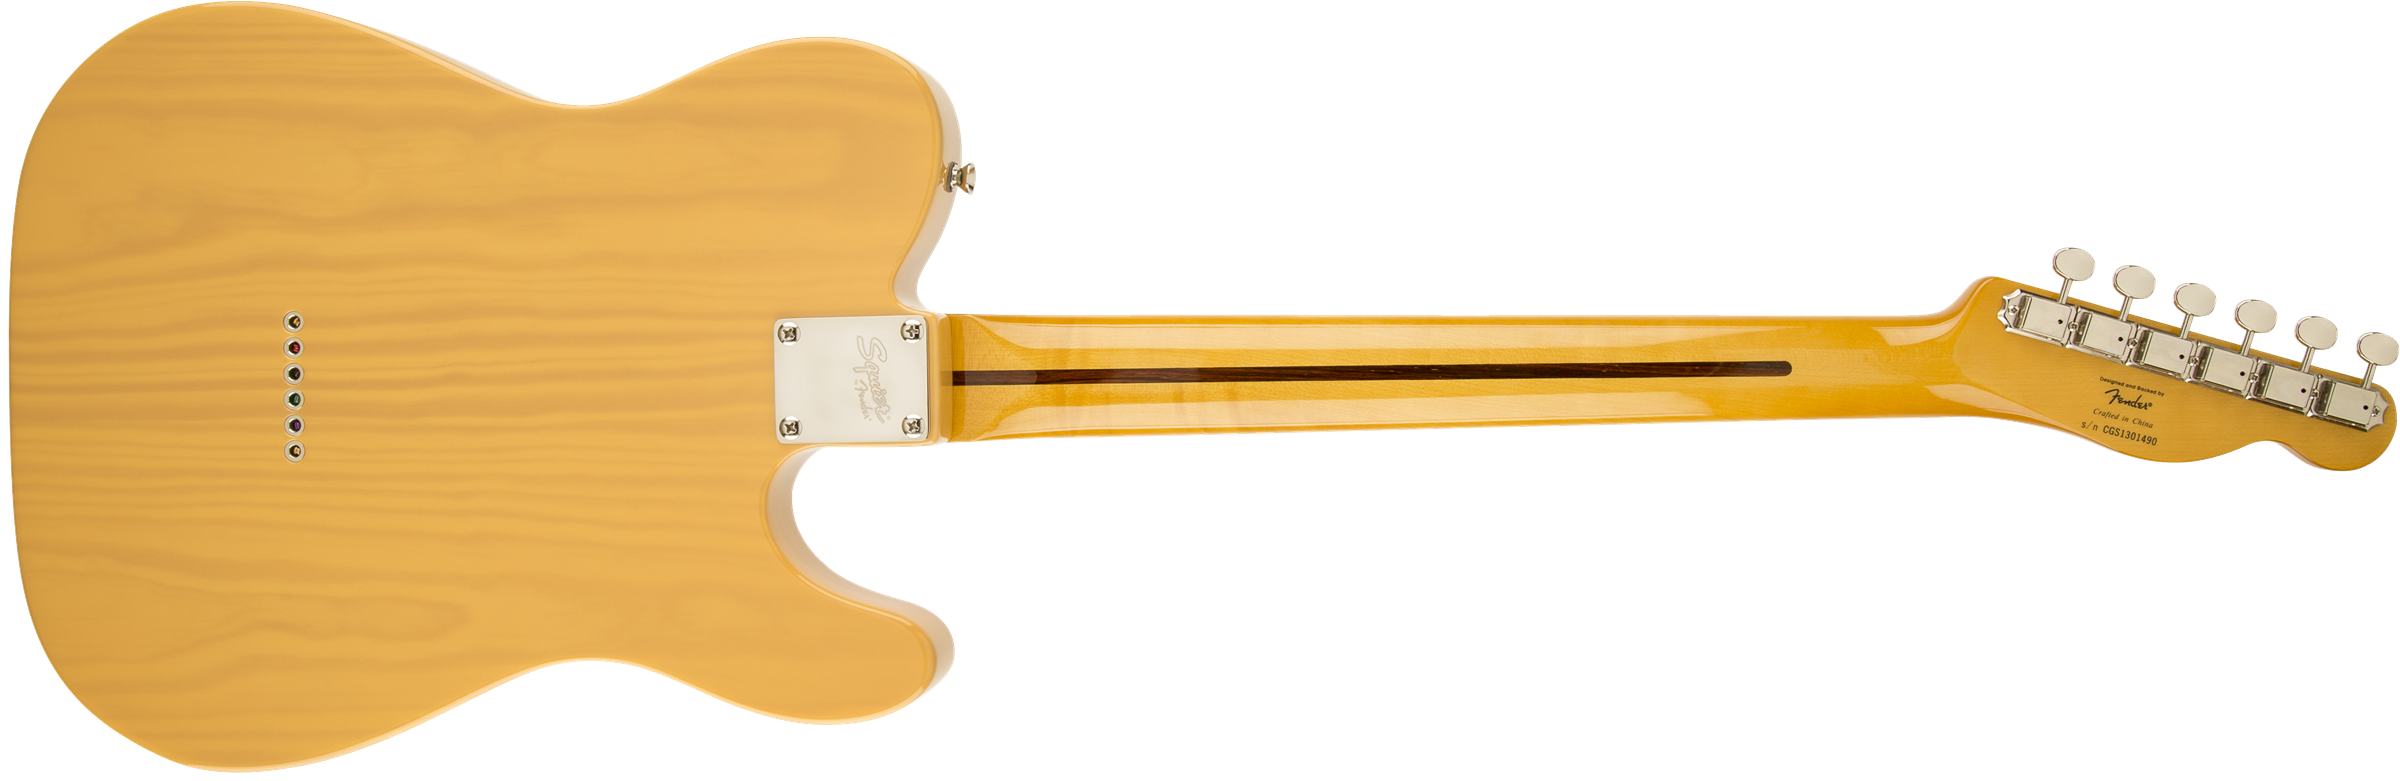 Squier Classic Vibe Telecaster 50s Left Handed Maple Fingerboard Butterscotch Blonde 0374035550